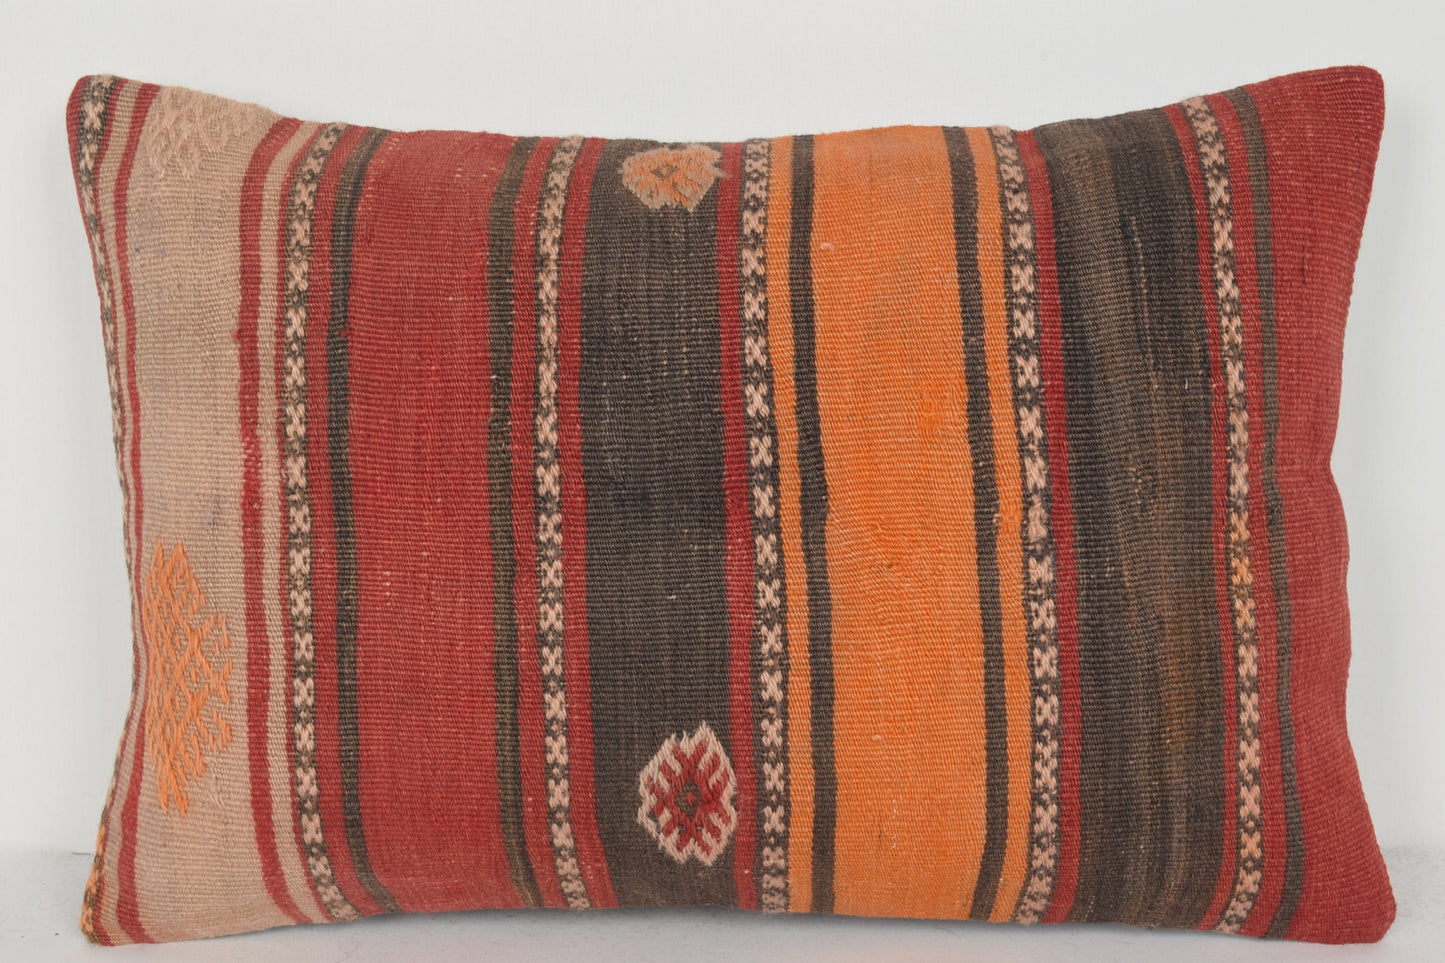 Kilim Patterned Pillow E00461 Lumbar Hellenistic Accents Casual